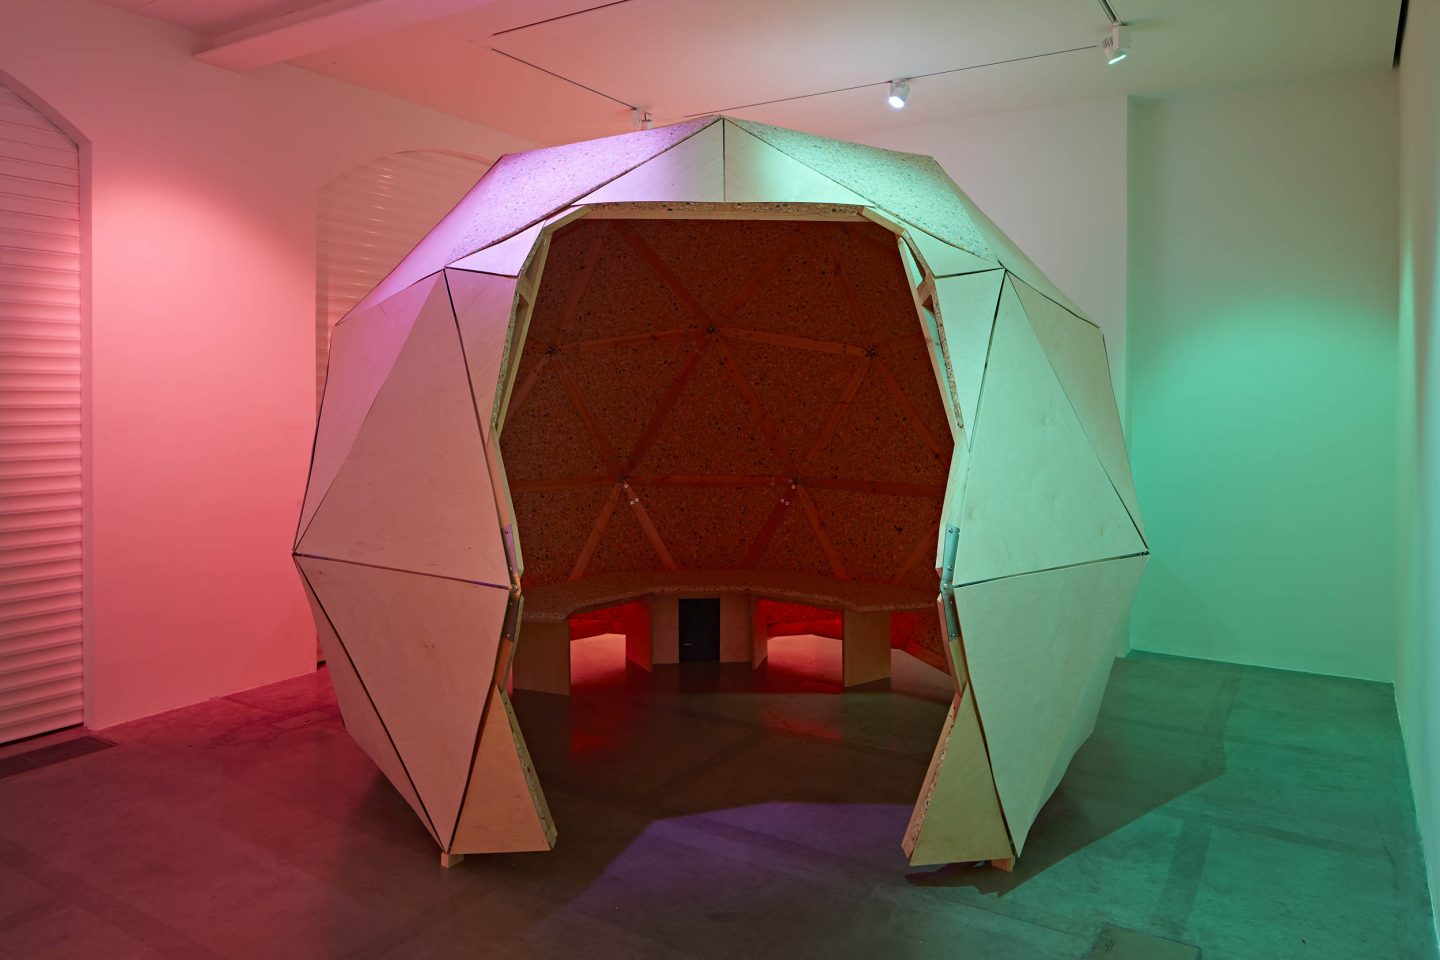 Image of a dome structure in the centre of a gallery space made from large triangular cut-outs. There is an entrance into the dome with a bench inside. There are also spotlights of the colour green on the right-hand side and the colour red on the left-hand side of the dome.